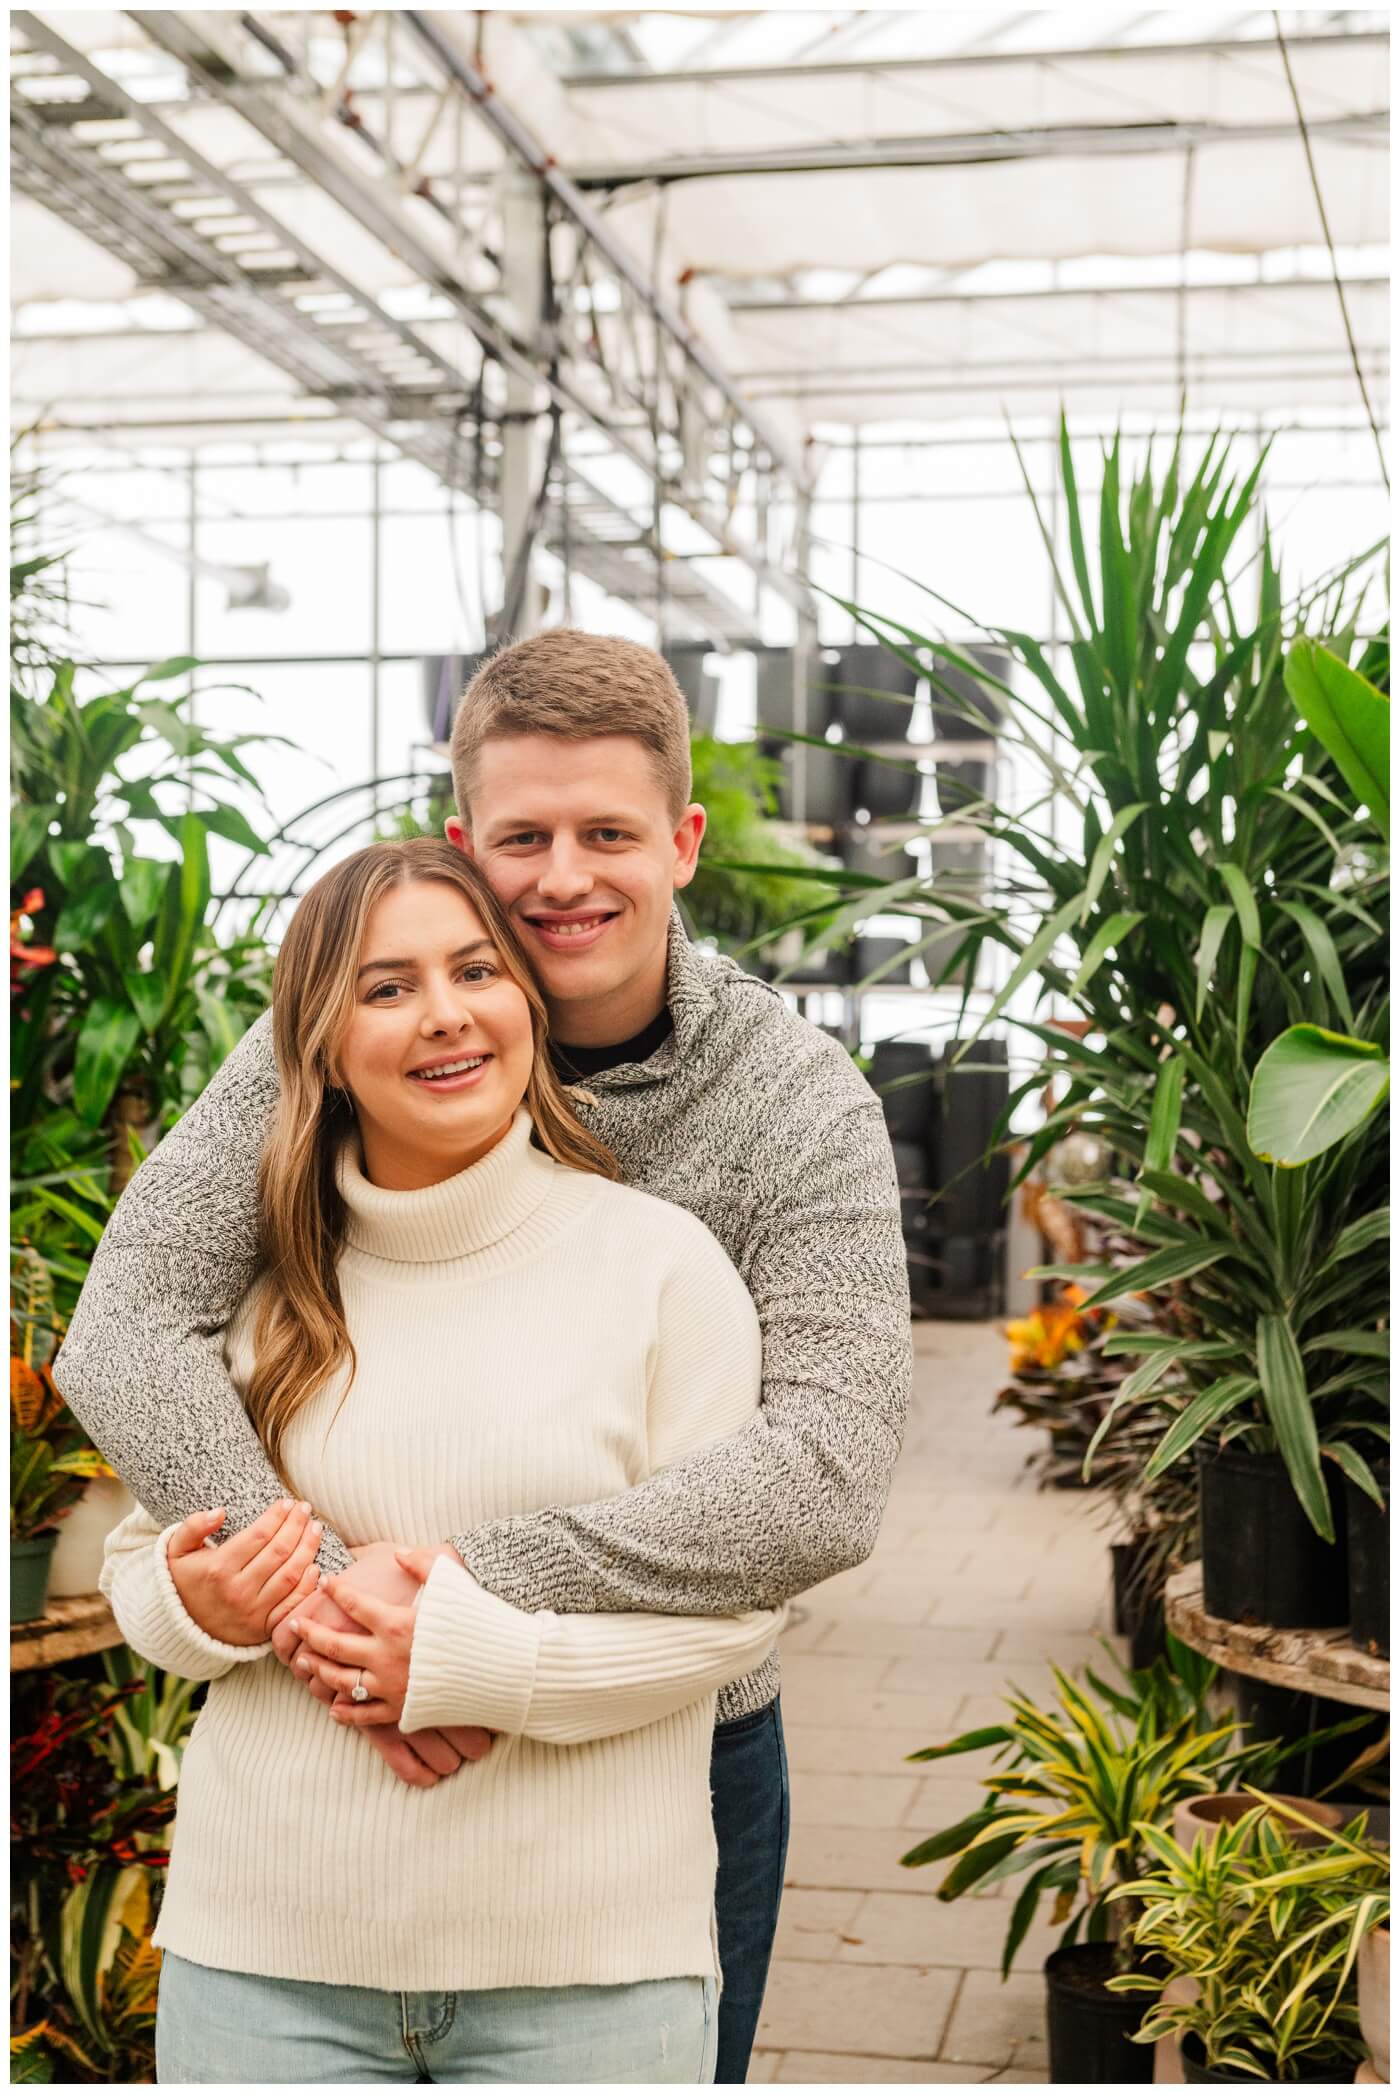 Michael & Briana - Engagement Session - 18 - Dutch Growers - Couple posing in greenhouse